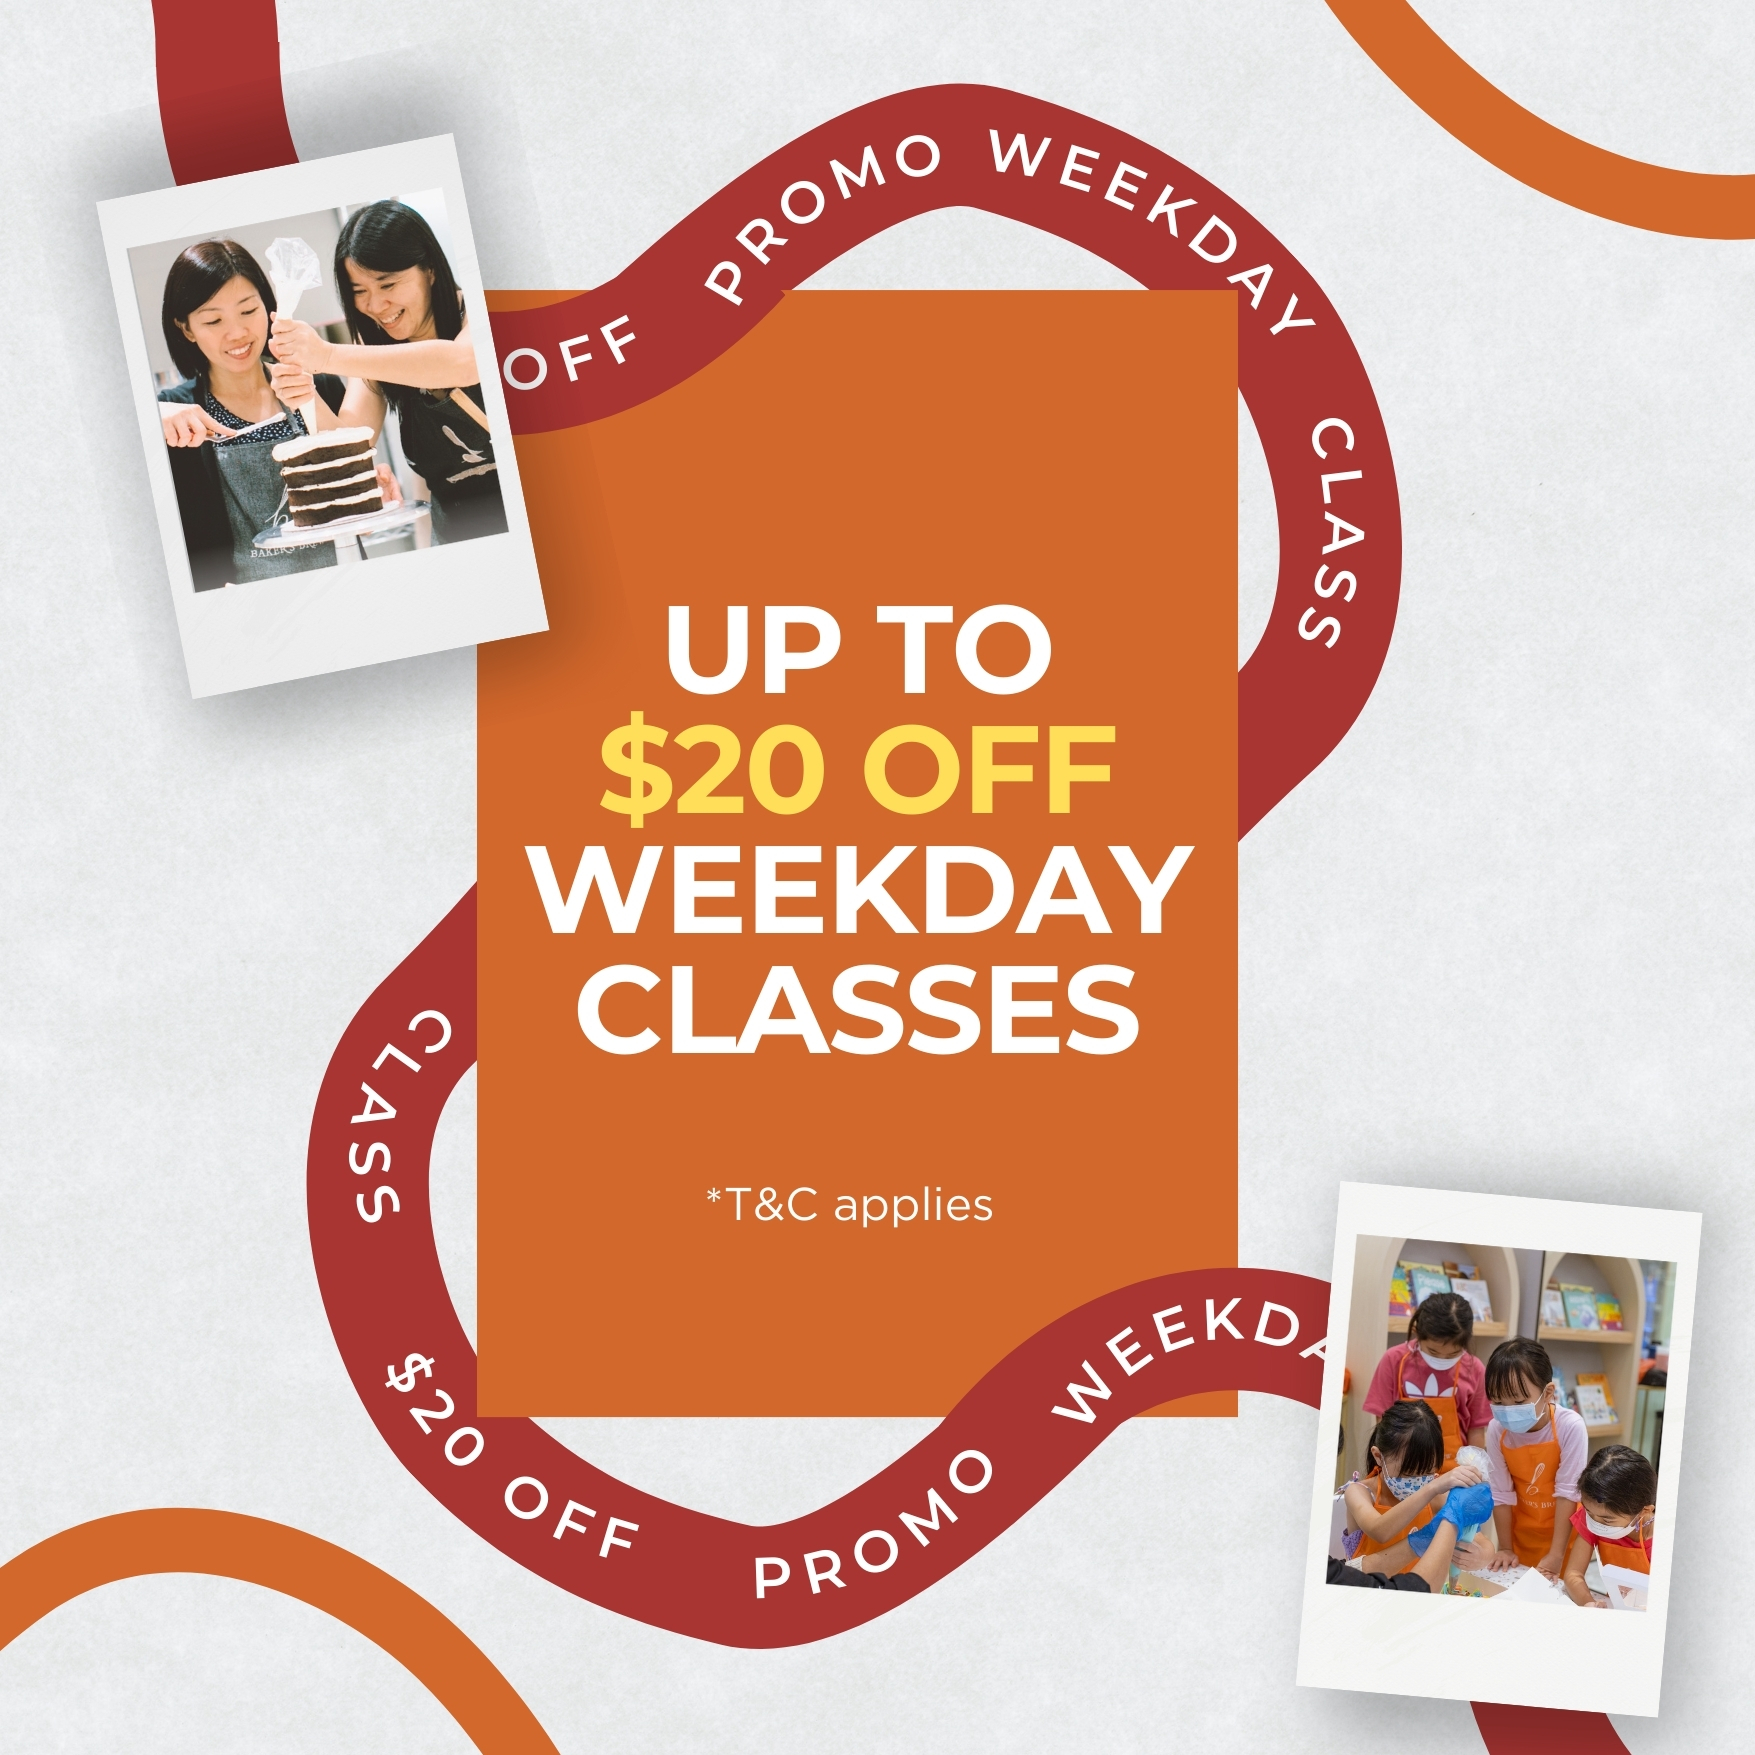 WEEKDAY CLASS SPECIAL